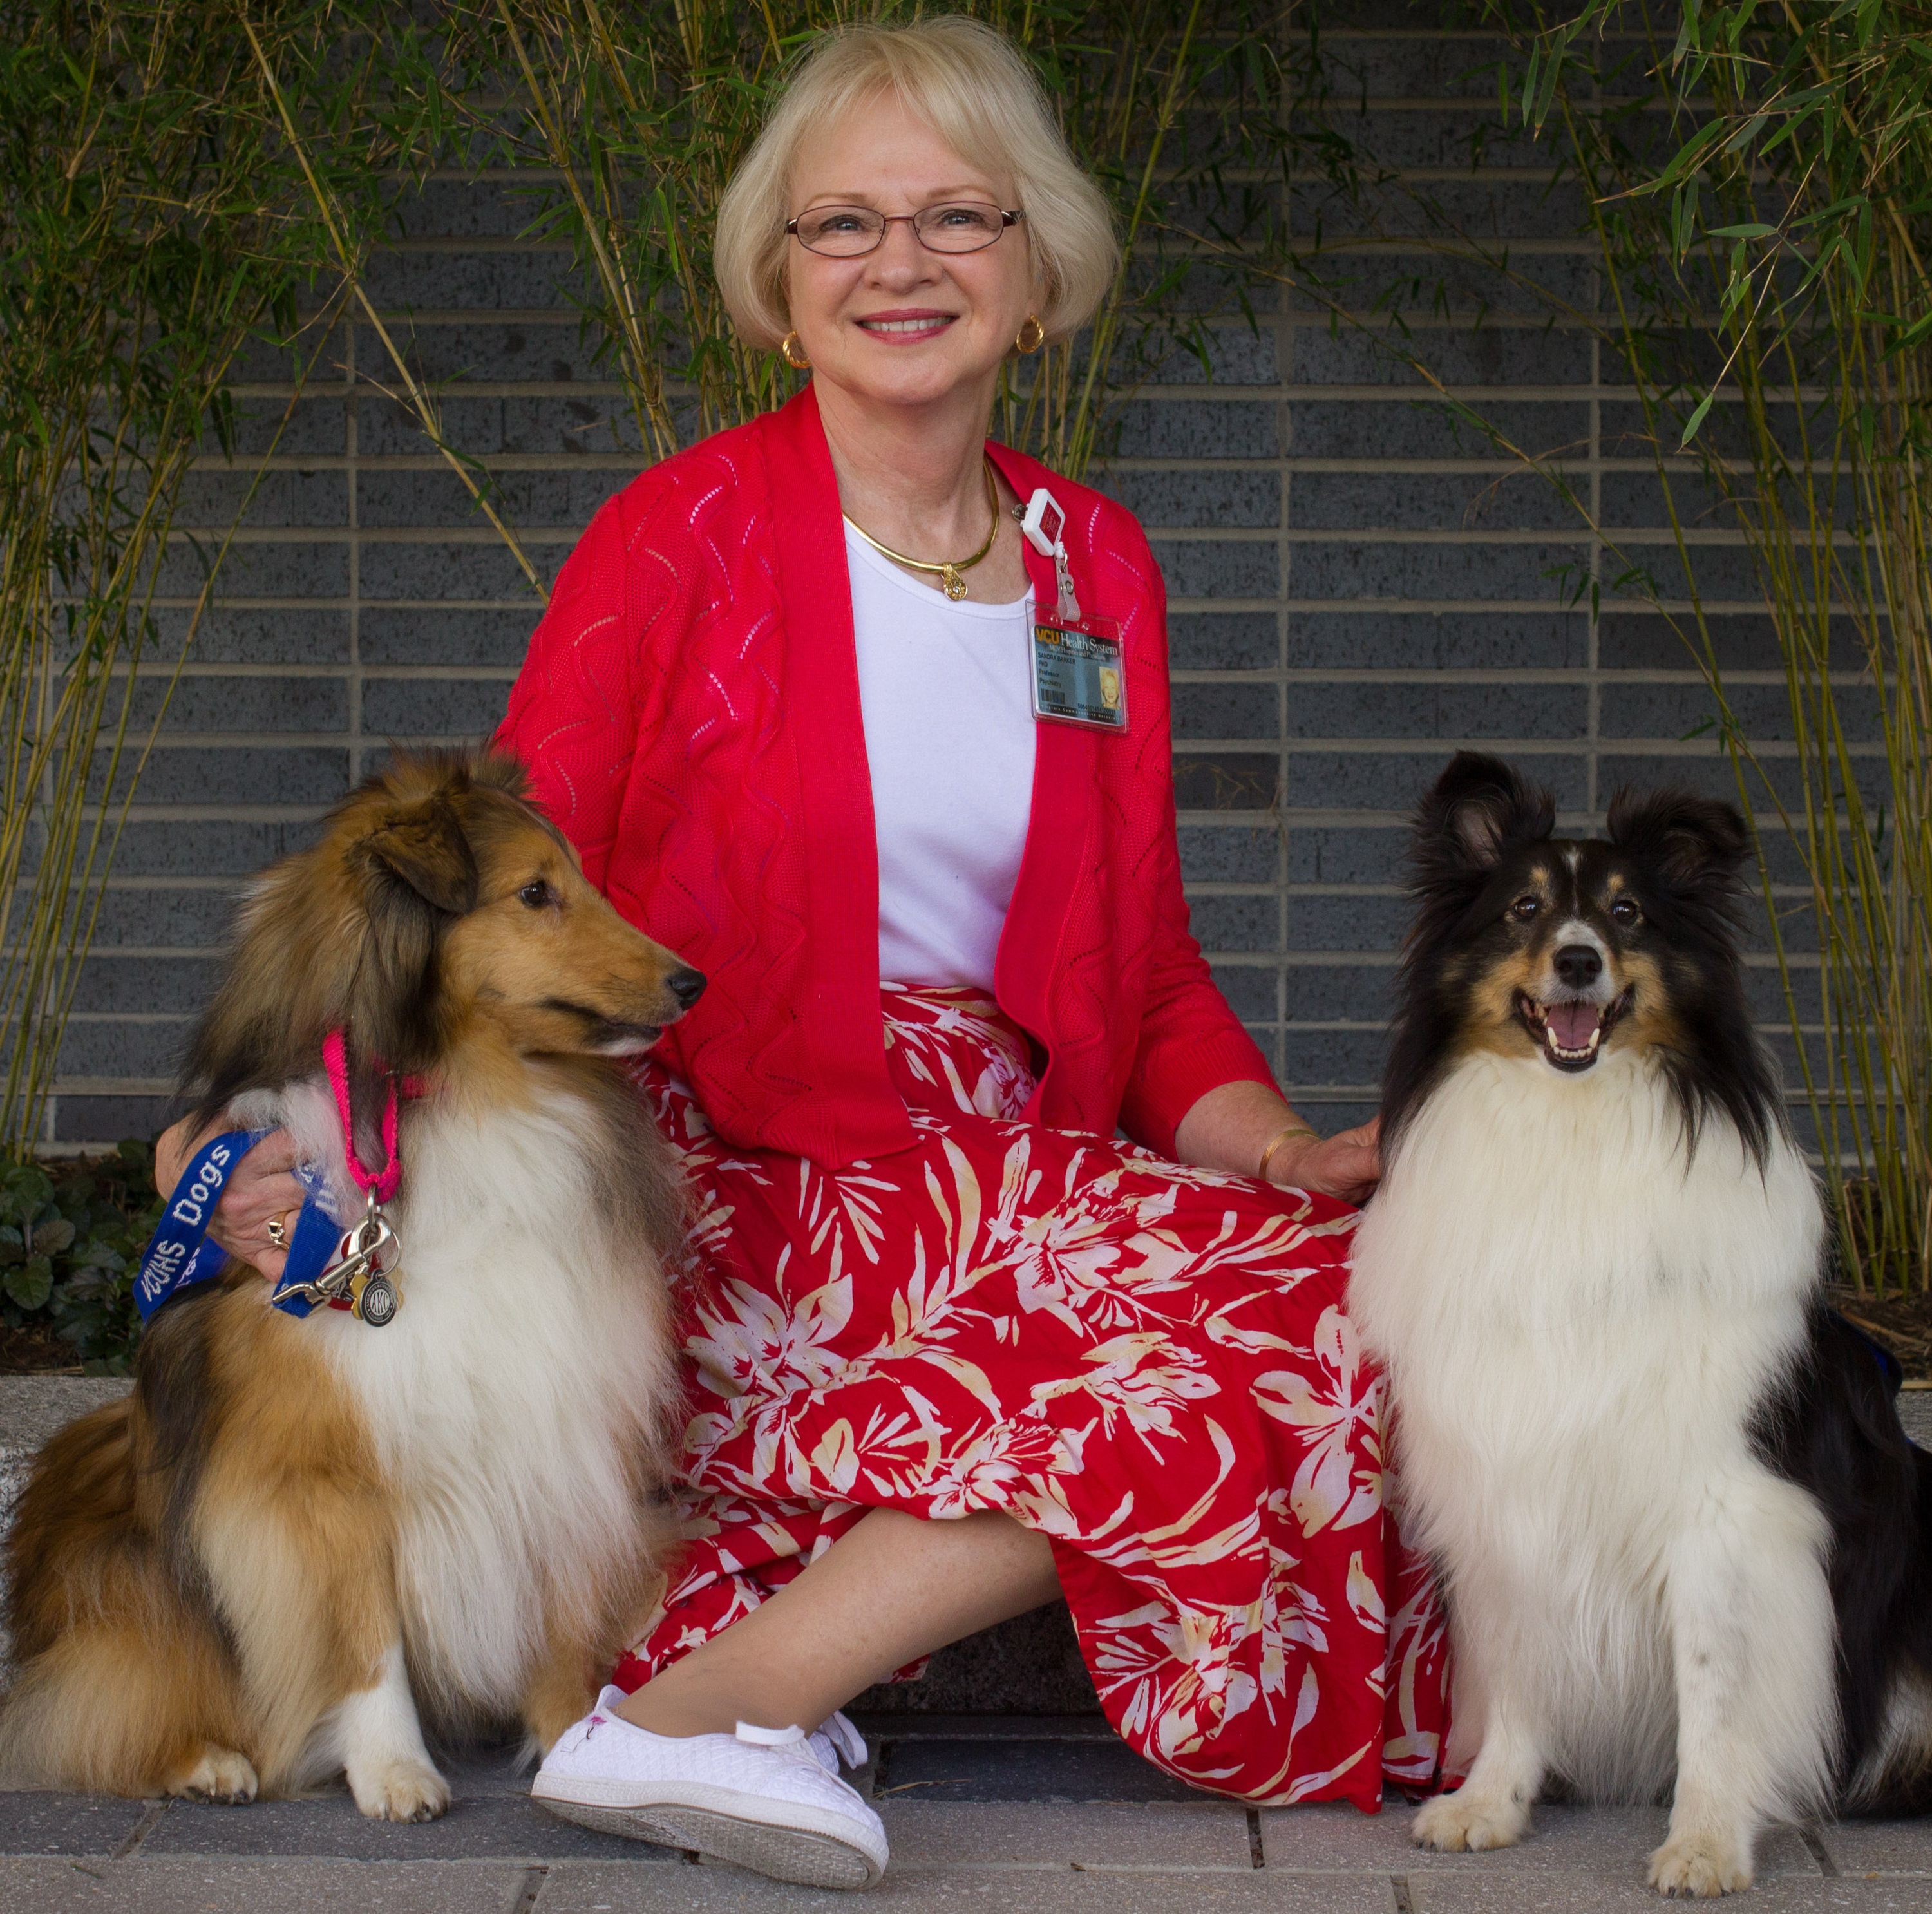 Dr. Sandy Barker is sitting with two shelties.